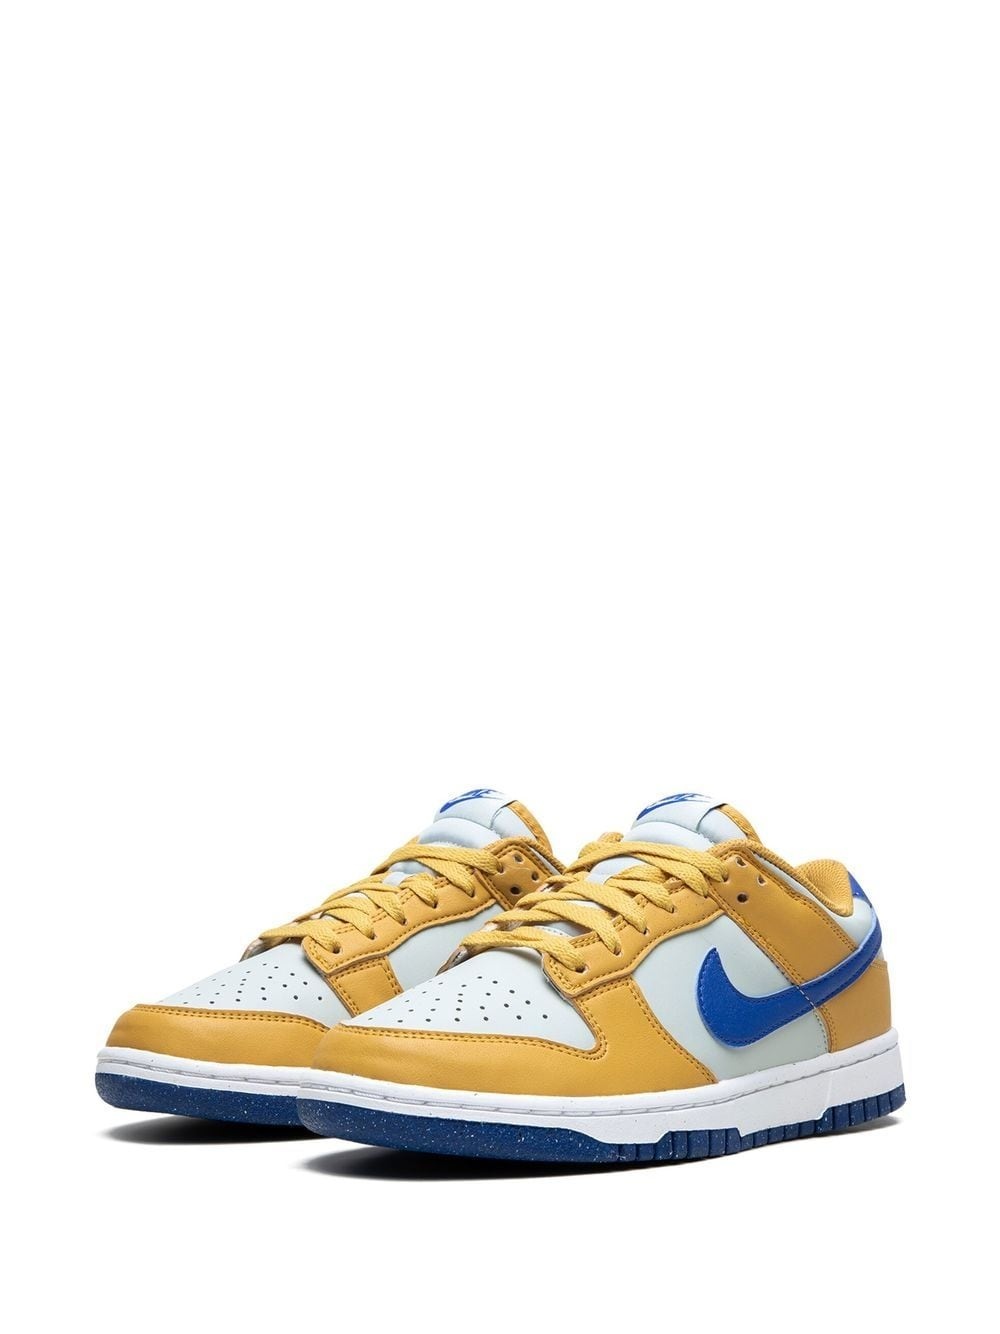 Dunk Low Next Nature "Wheat Gold Royal" sneakers - 5